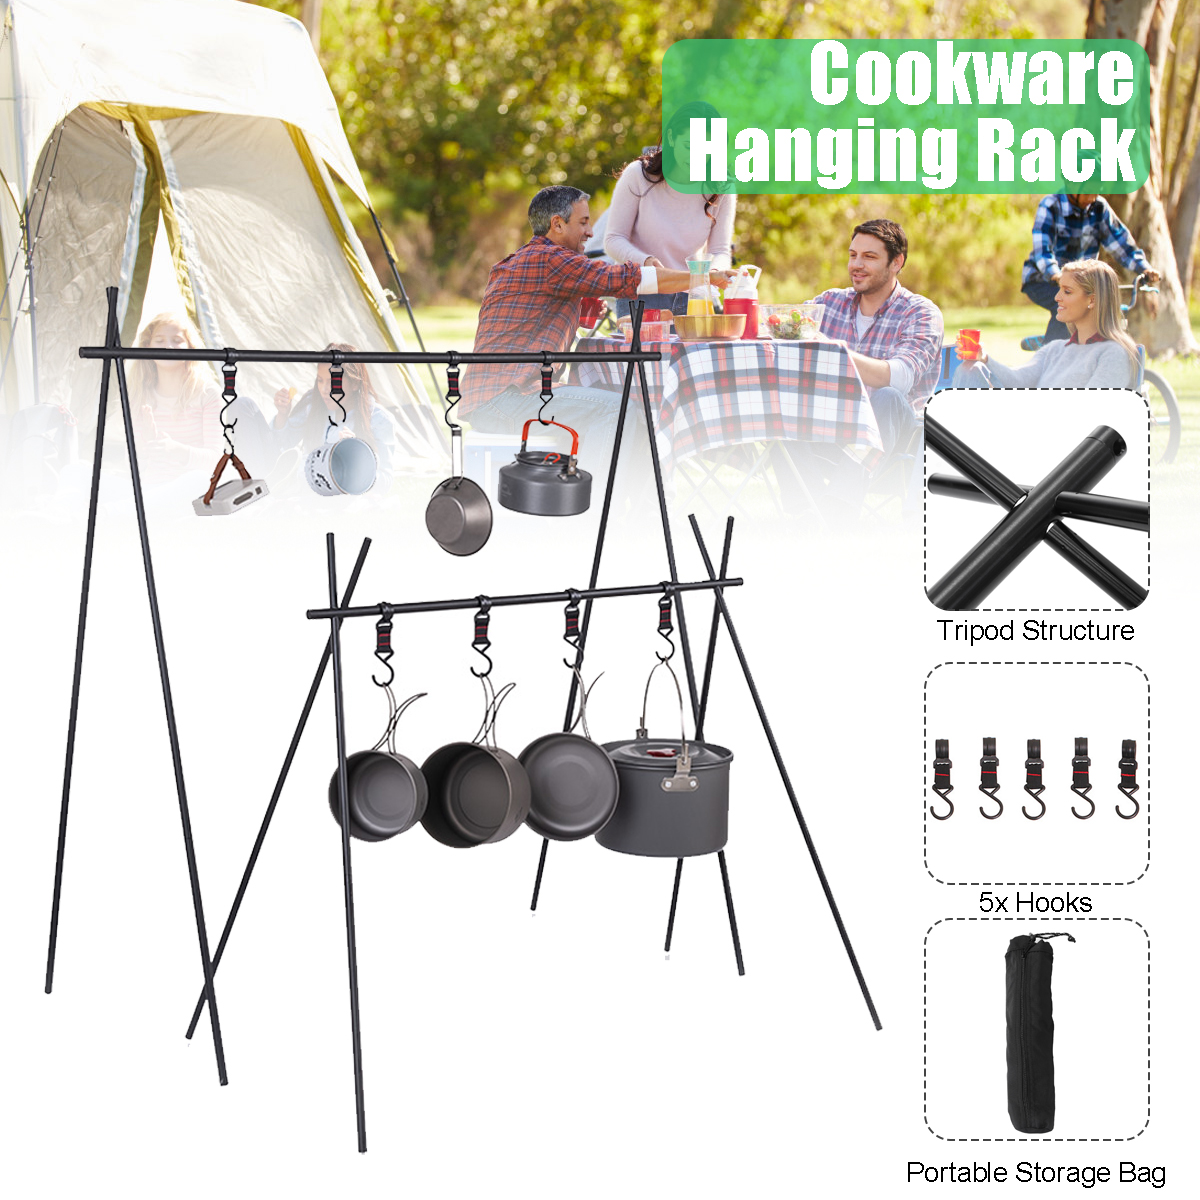 Ultralight-Hanging-Rack-Folding-Cookware-Storage-Triangle-Racks-Clothes-Shelf-Up-to-8kg-Outdoor-Camp-1780193-1